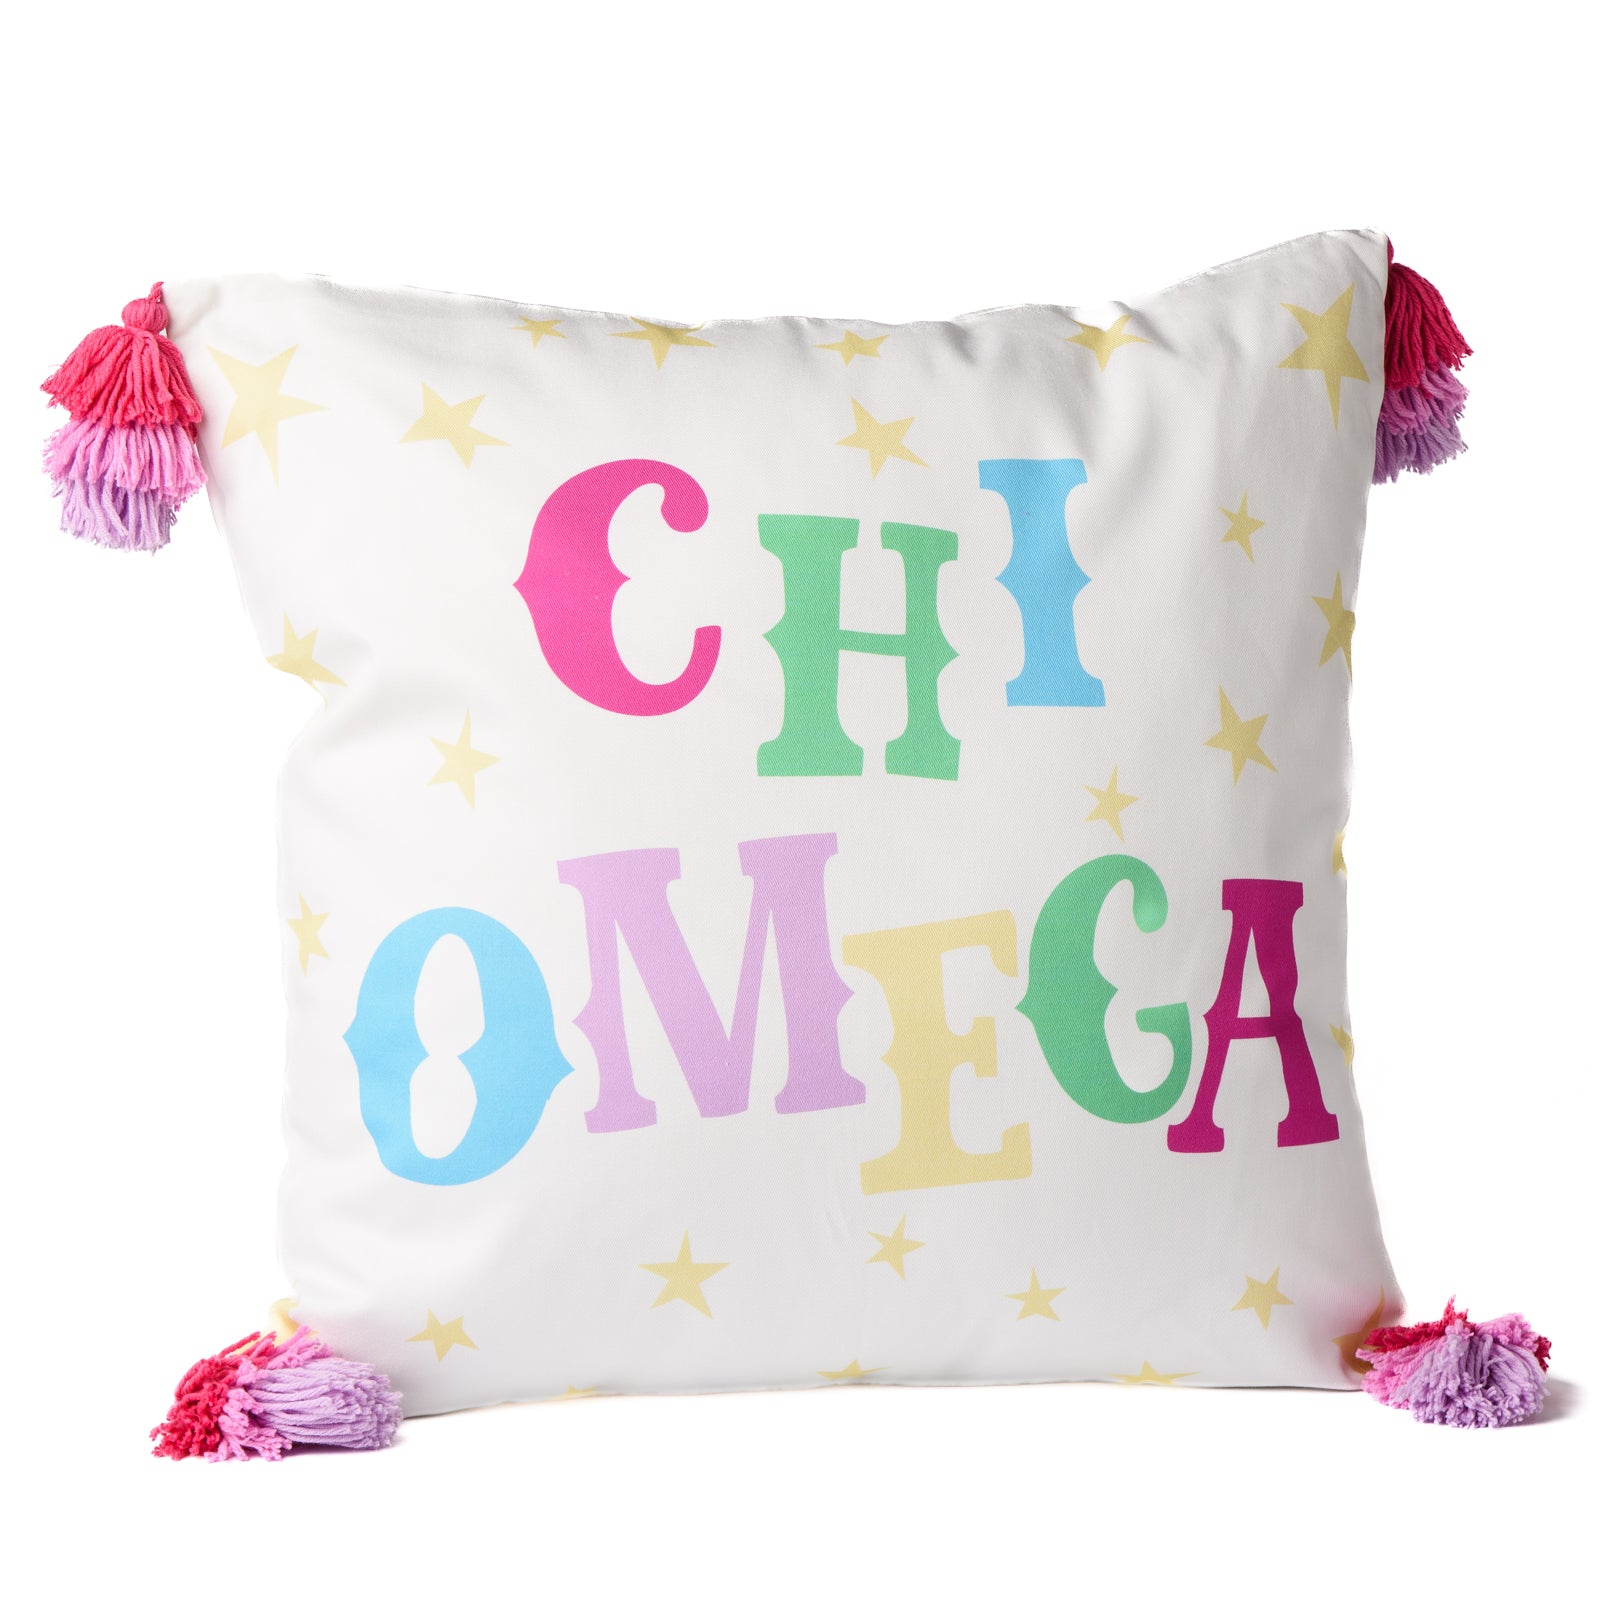 CHI OMEGA "Oh My Stars" Printed Pillow